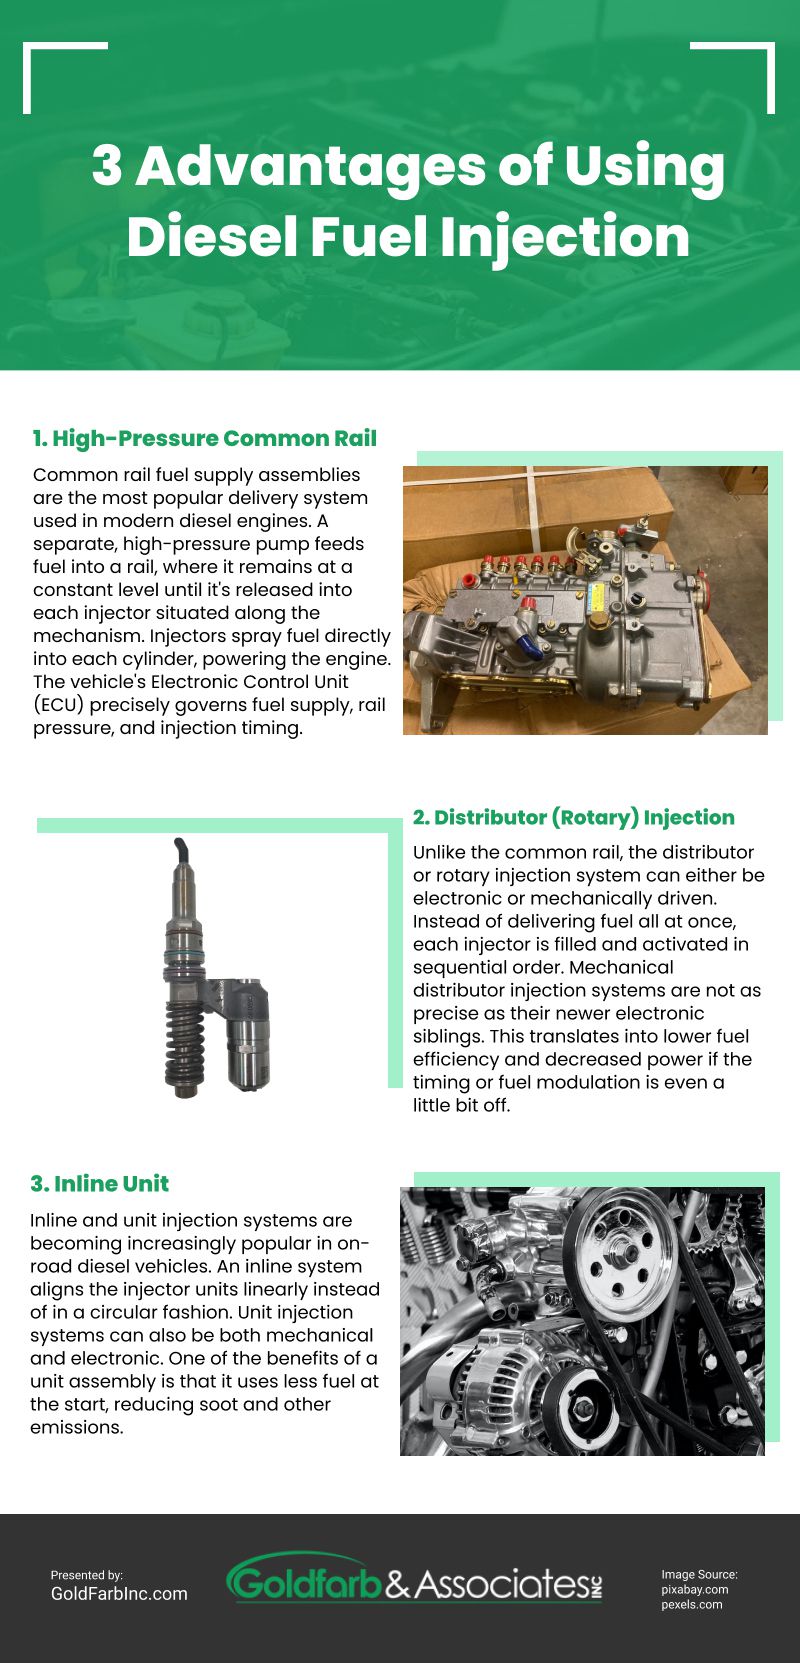 3 Advantages of Using Diesel Fuel Injection Infographic